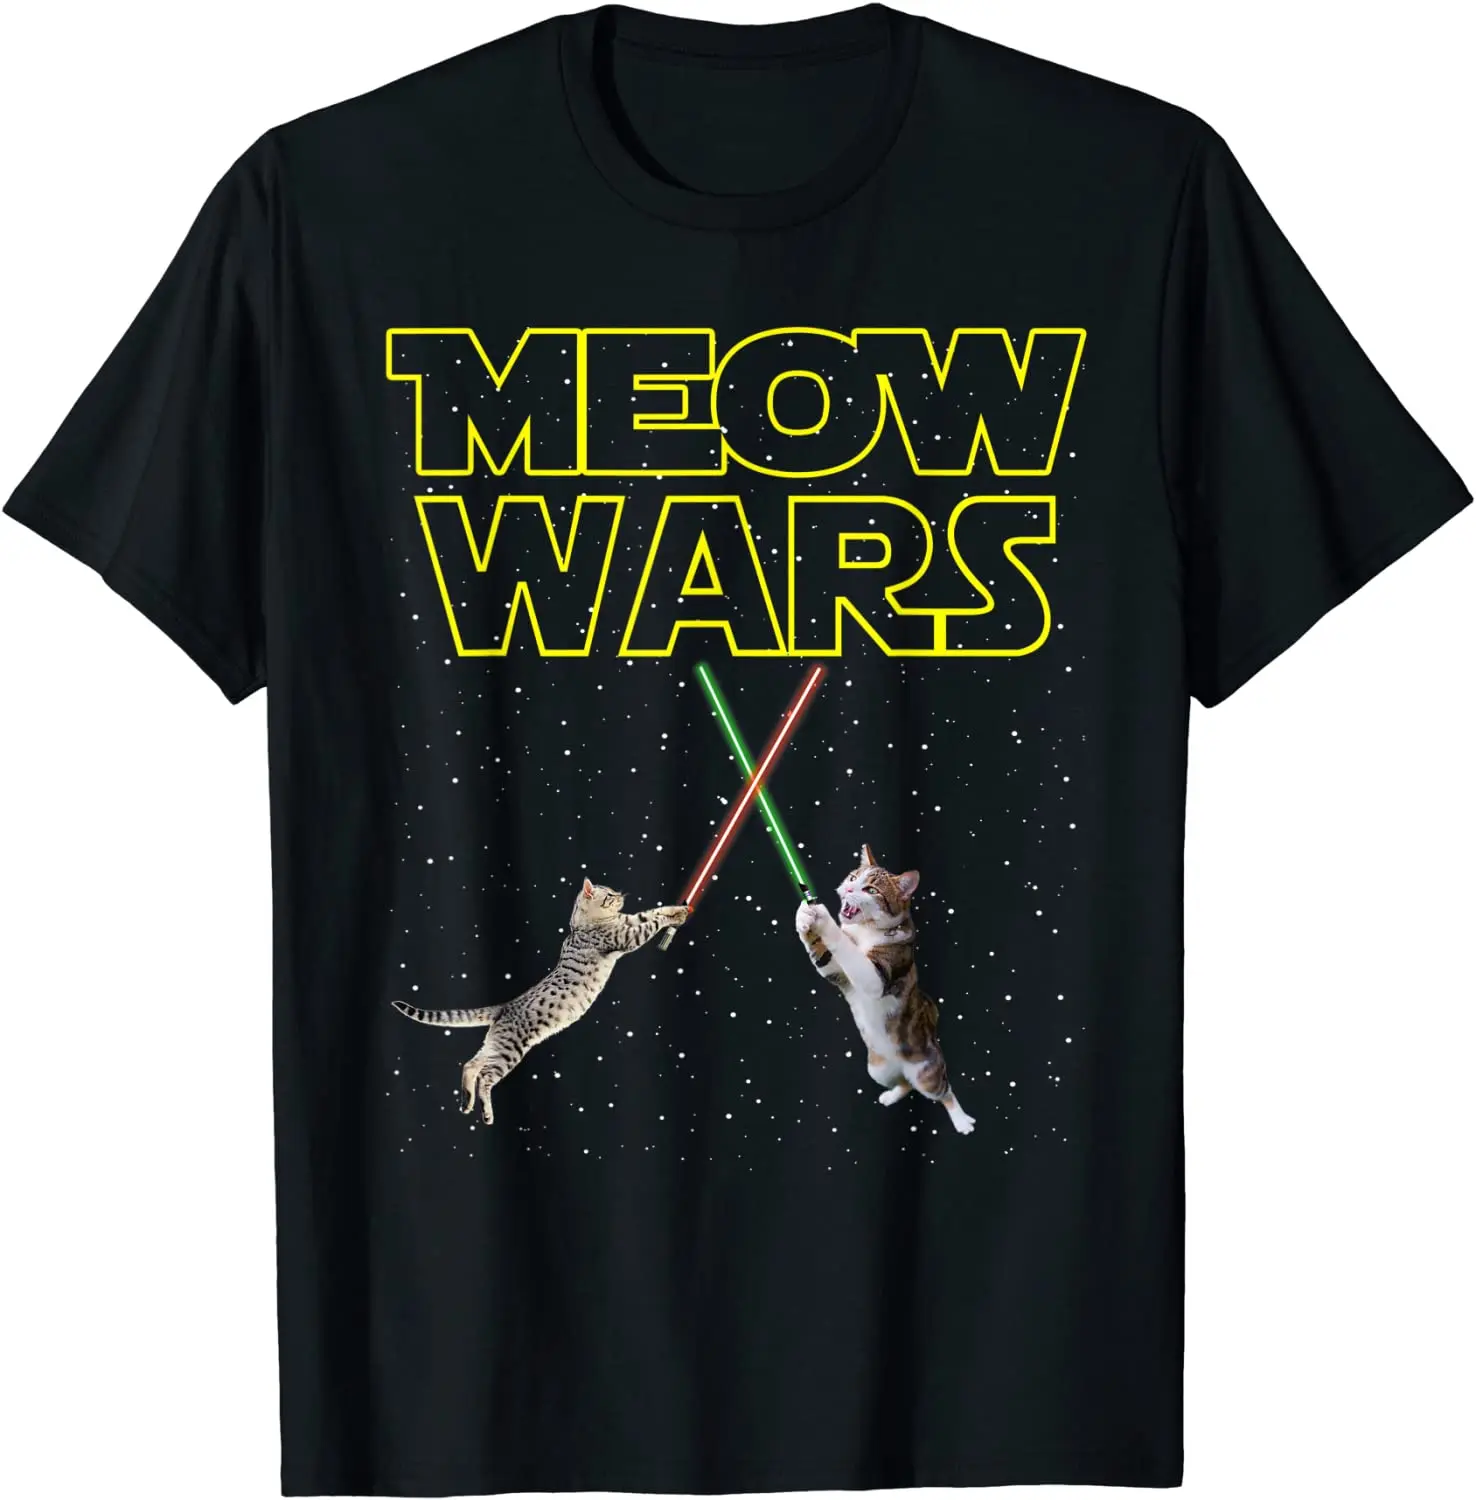 

Meow Wars Cat Shirt Funny Gifts For Cats Lovers T-Shirts T-Shirt Cotton Men T Shirts Normal Tops & Tees Brand Printed